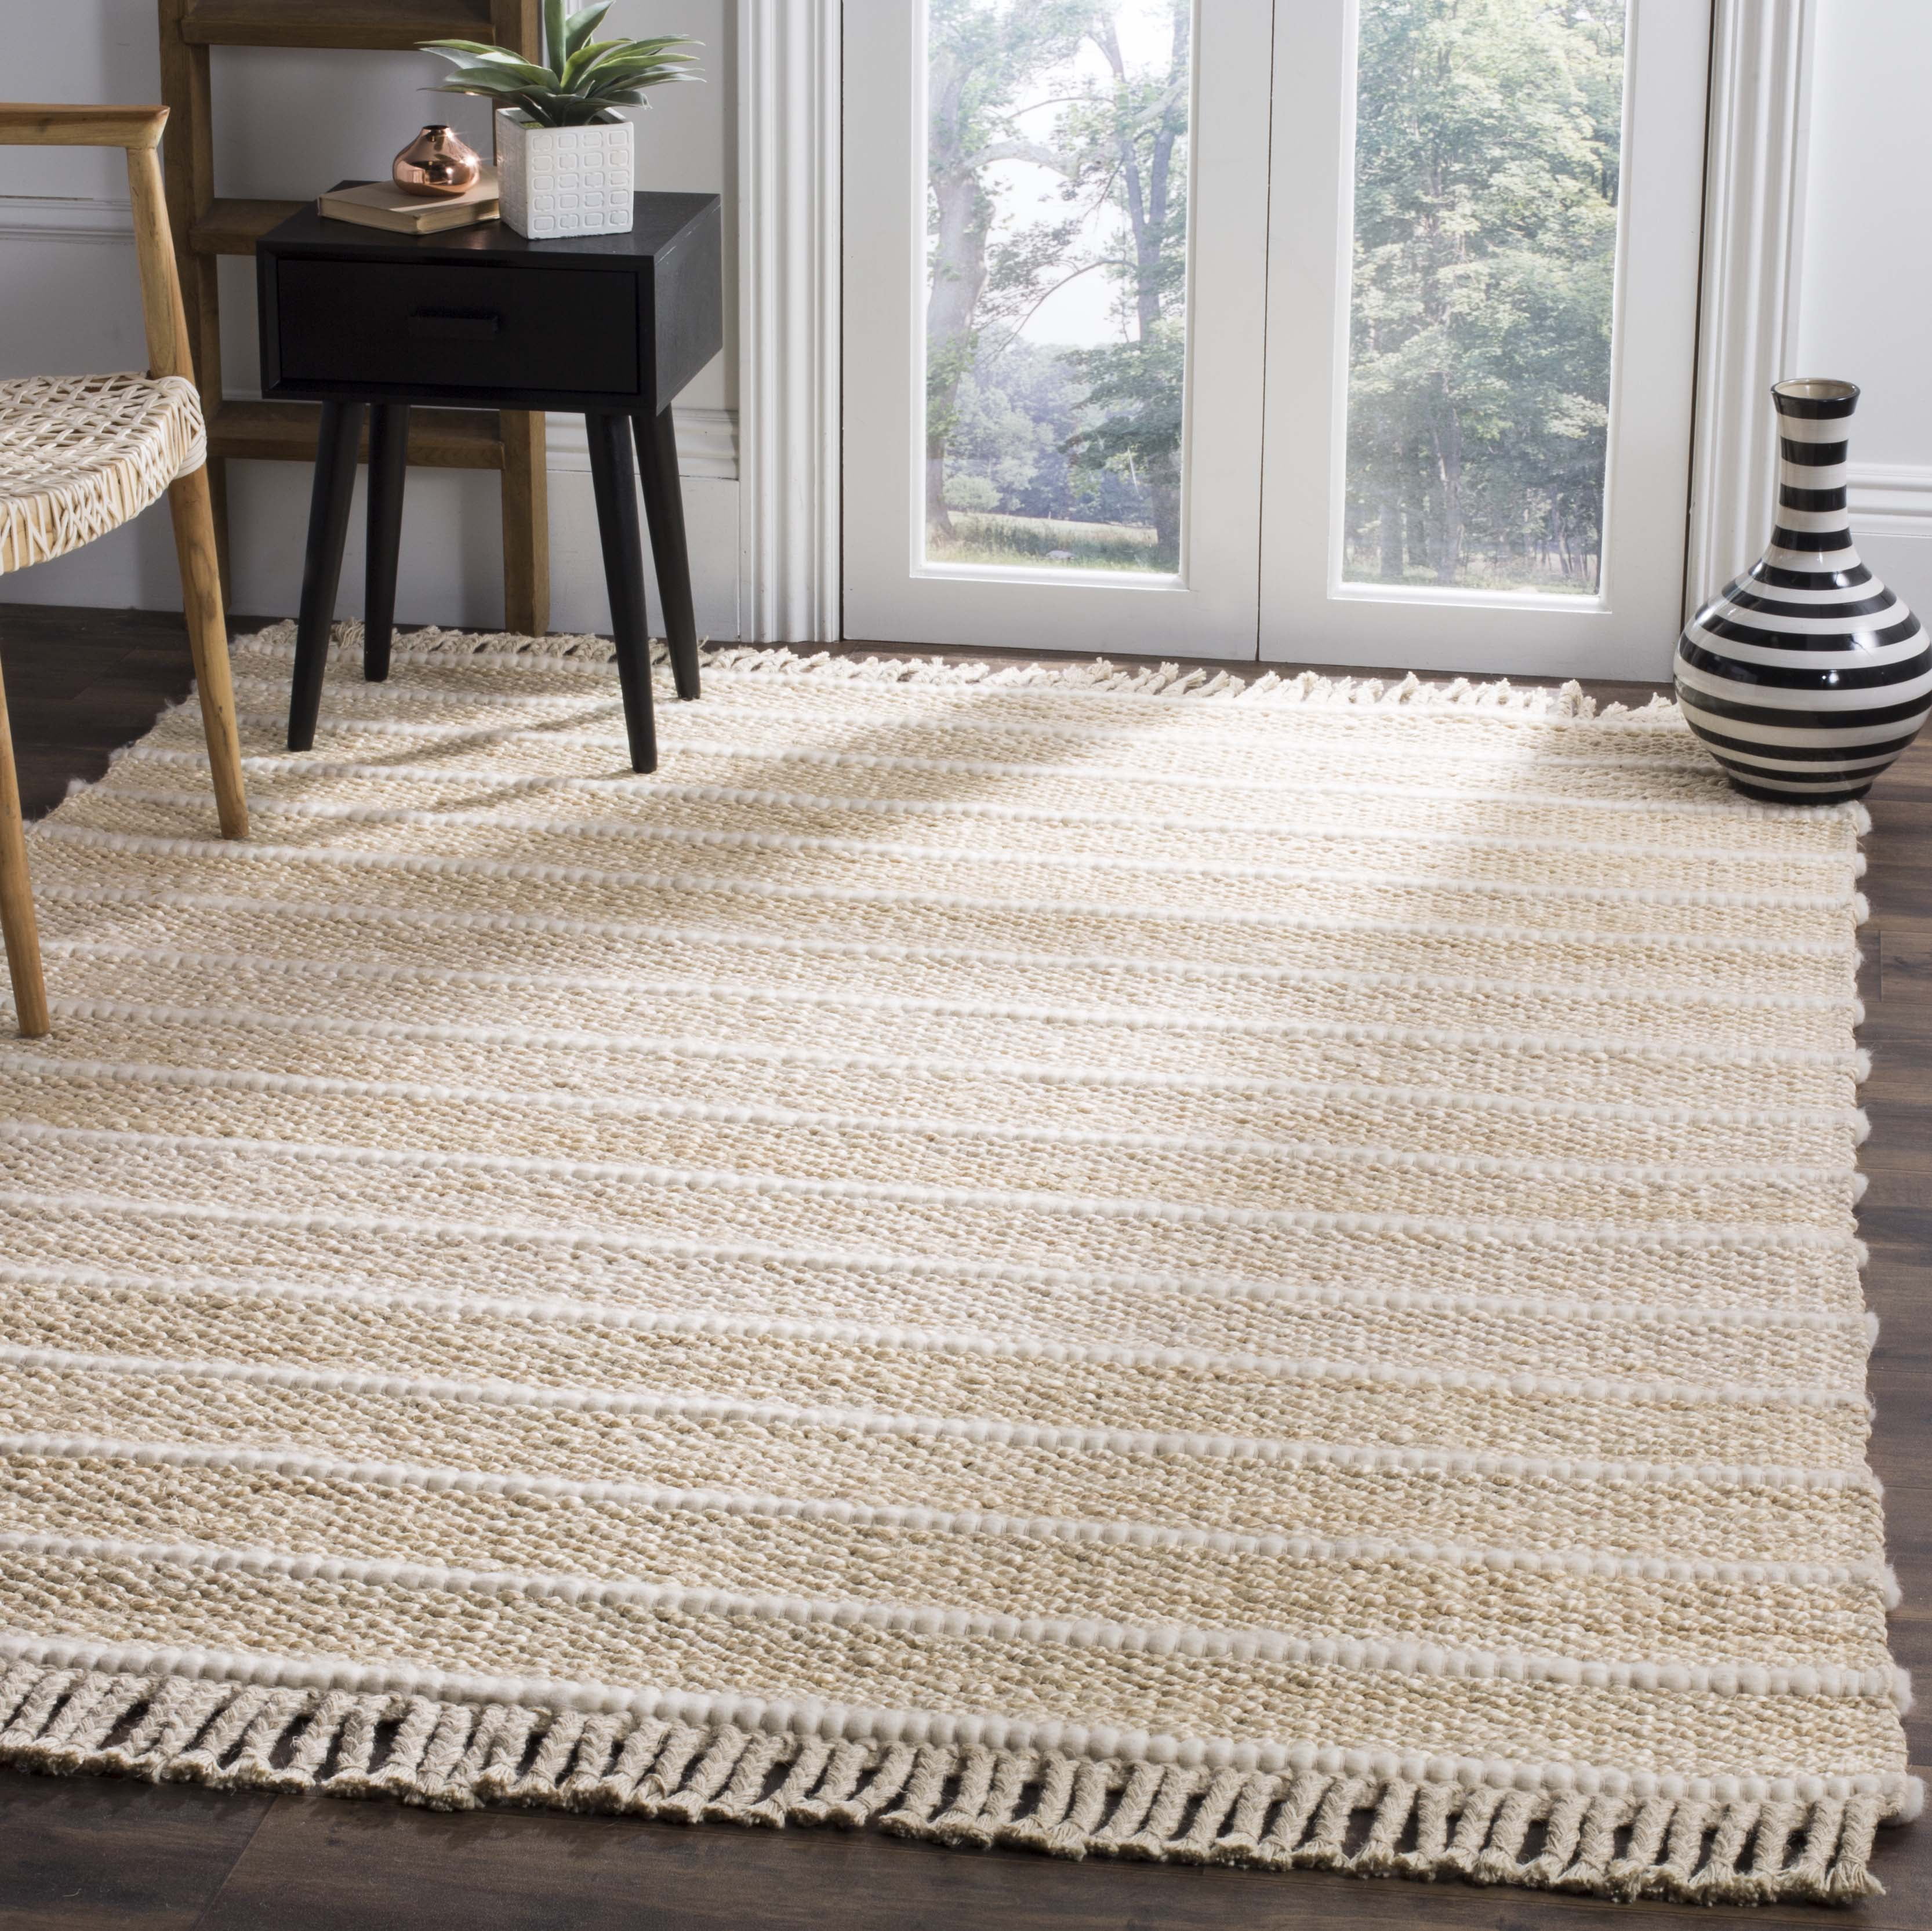 SAFAVIEH Natural Fiber Carrie Braided Area Rug, Ivory, 6' x 6' Square 